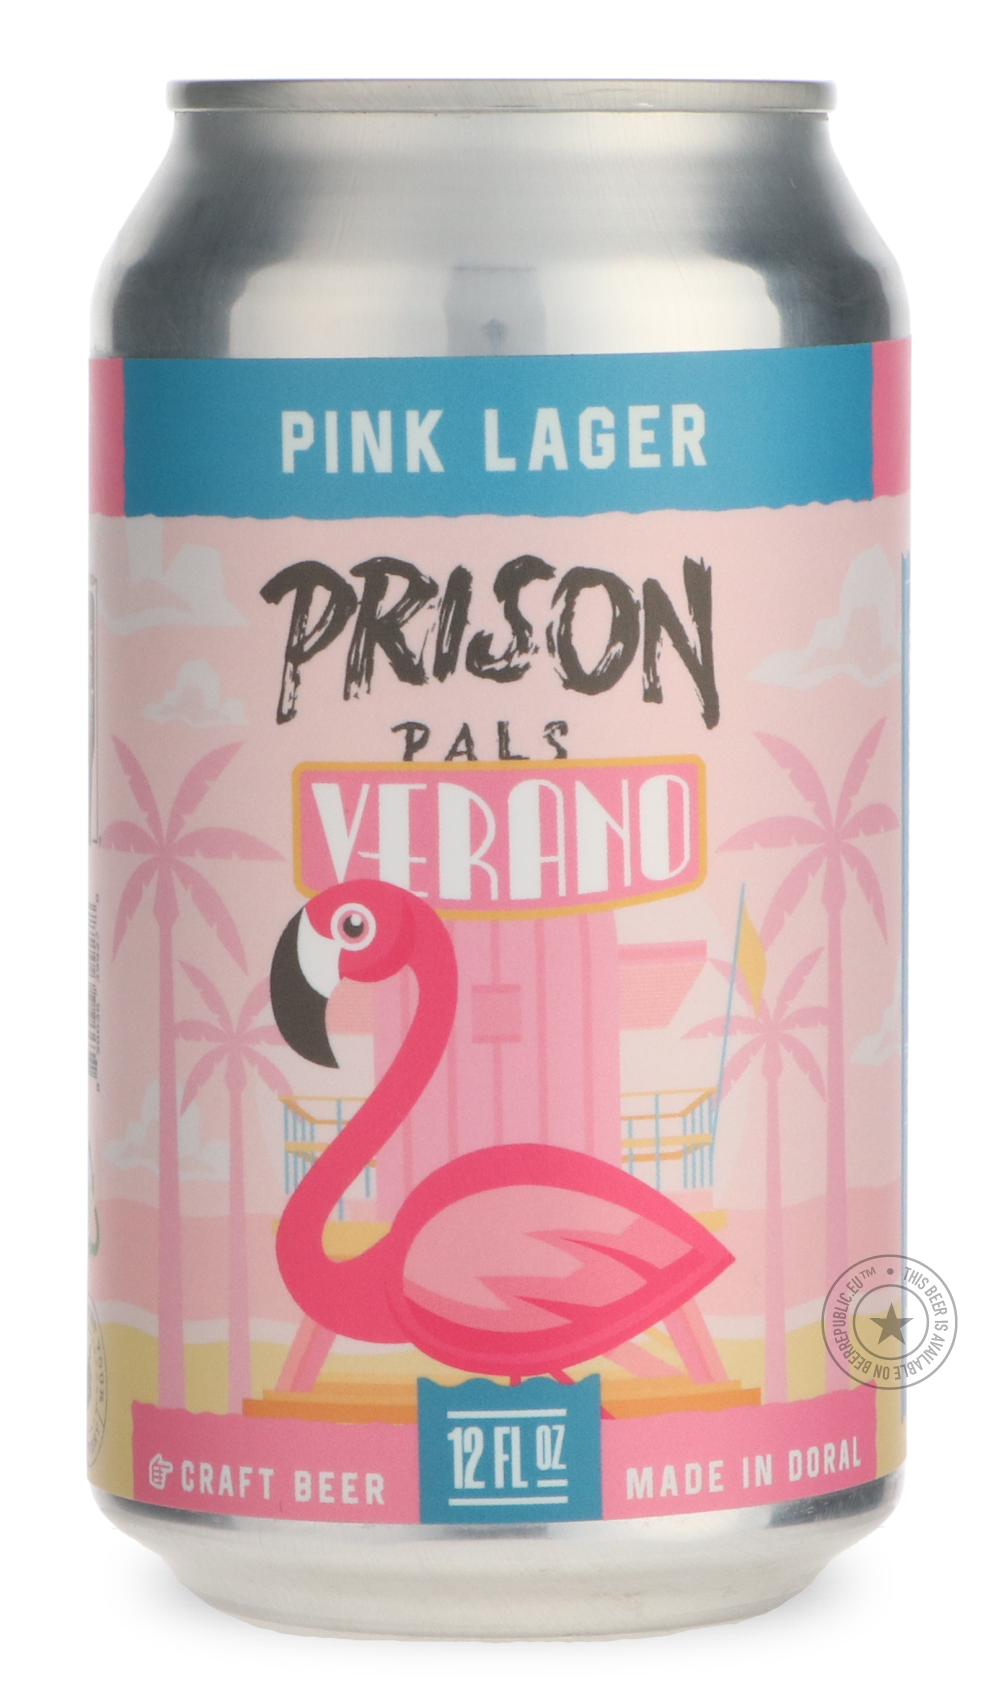 -Prison Pals- Verano-Pale- Only @ Beer Republic - The best online beer store for American & Canadian craft beer - Buy beer online from the USA and Canada - Bier online kopen - Amerikaans bier kopen - Craft beer store - Craft beer kopen - Amerikanisch bier kaufen - Bier online kaufen - Acheter biere online - IPA - Stout - Porter - New England IPA - Hazy IPA - Imperial Stout - Barrel Aged - Barrel Aged Imperial Stout - Brown - Dark beer - Blond - Blonde - Pilsner - Lager - Wheat - Weizen - Amber - Barley Wine